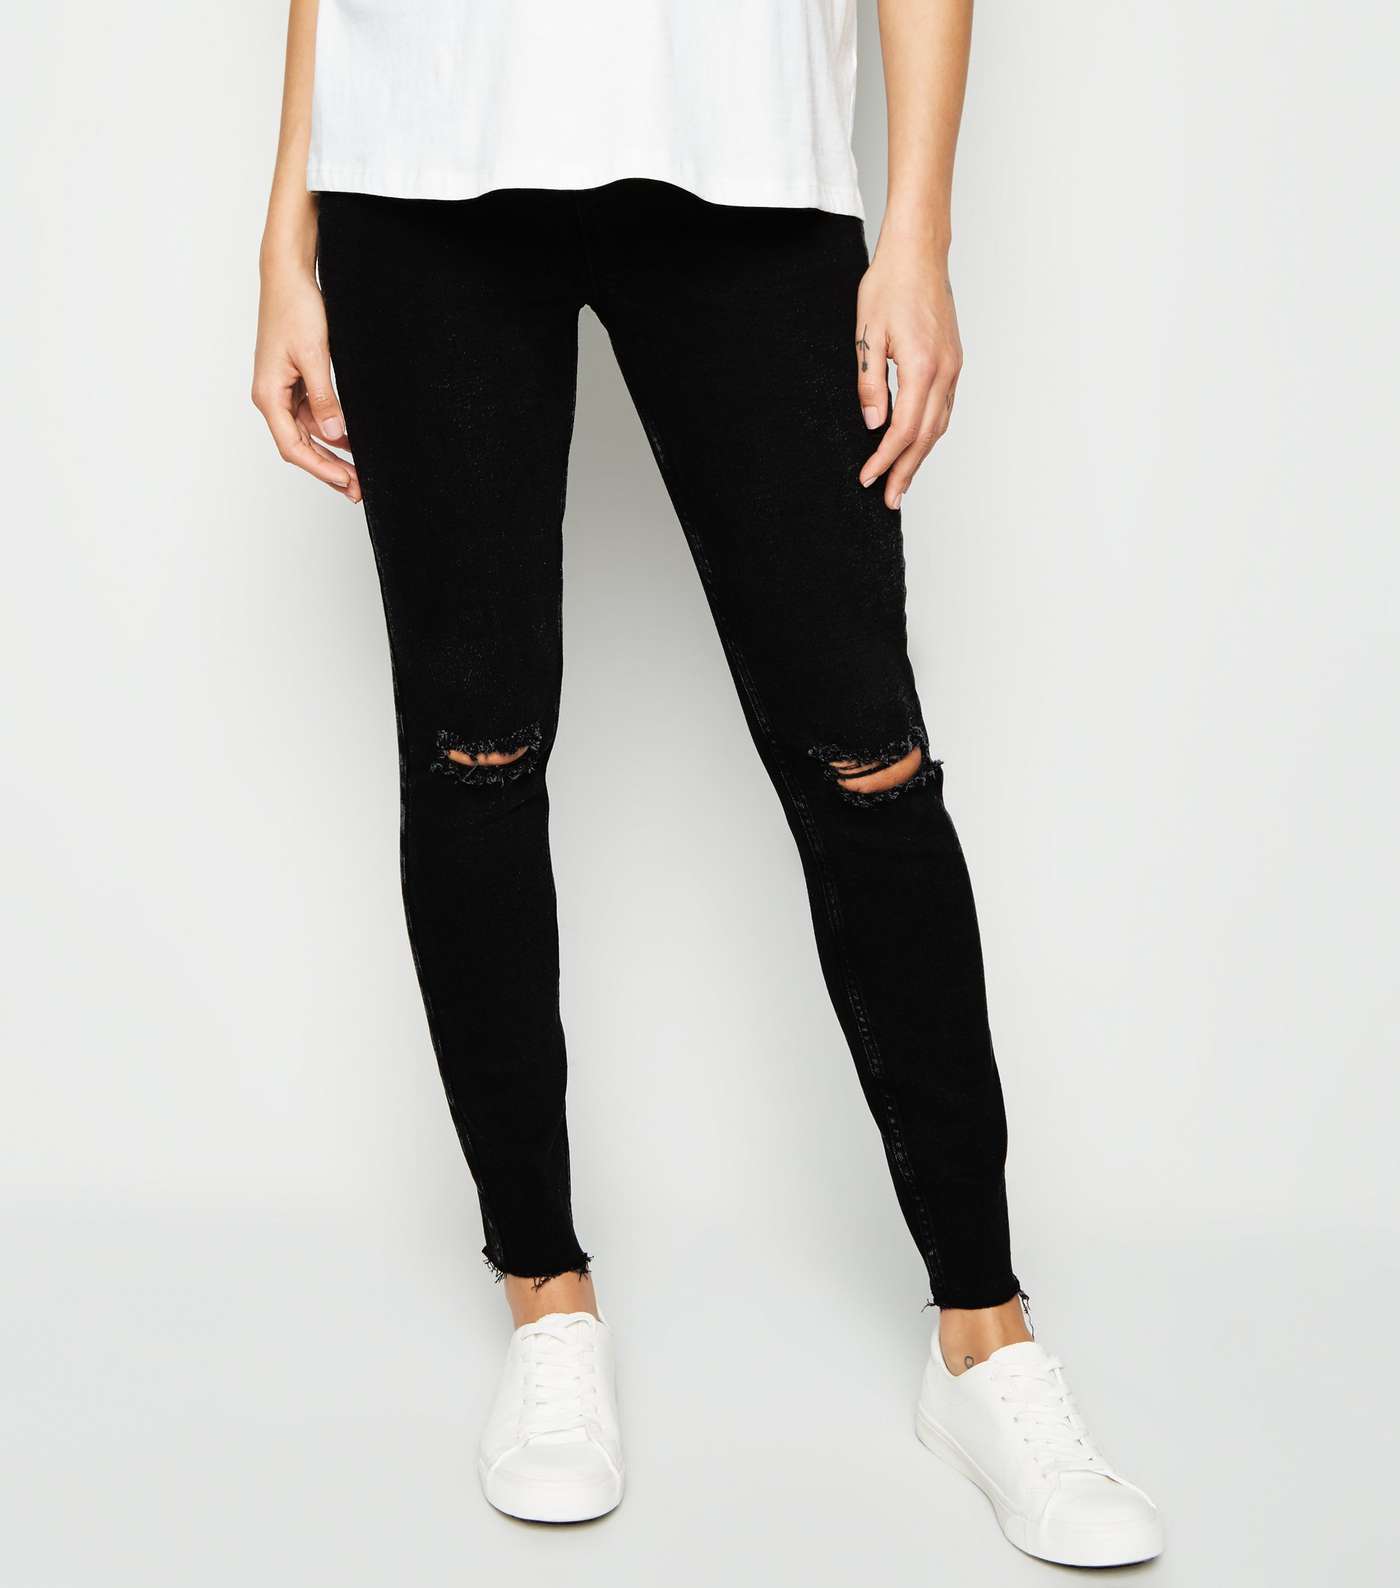 Maternity Black Ripped Knee Over Bump Skinny Jeans Image 2